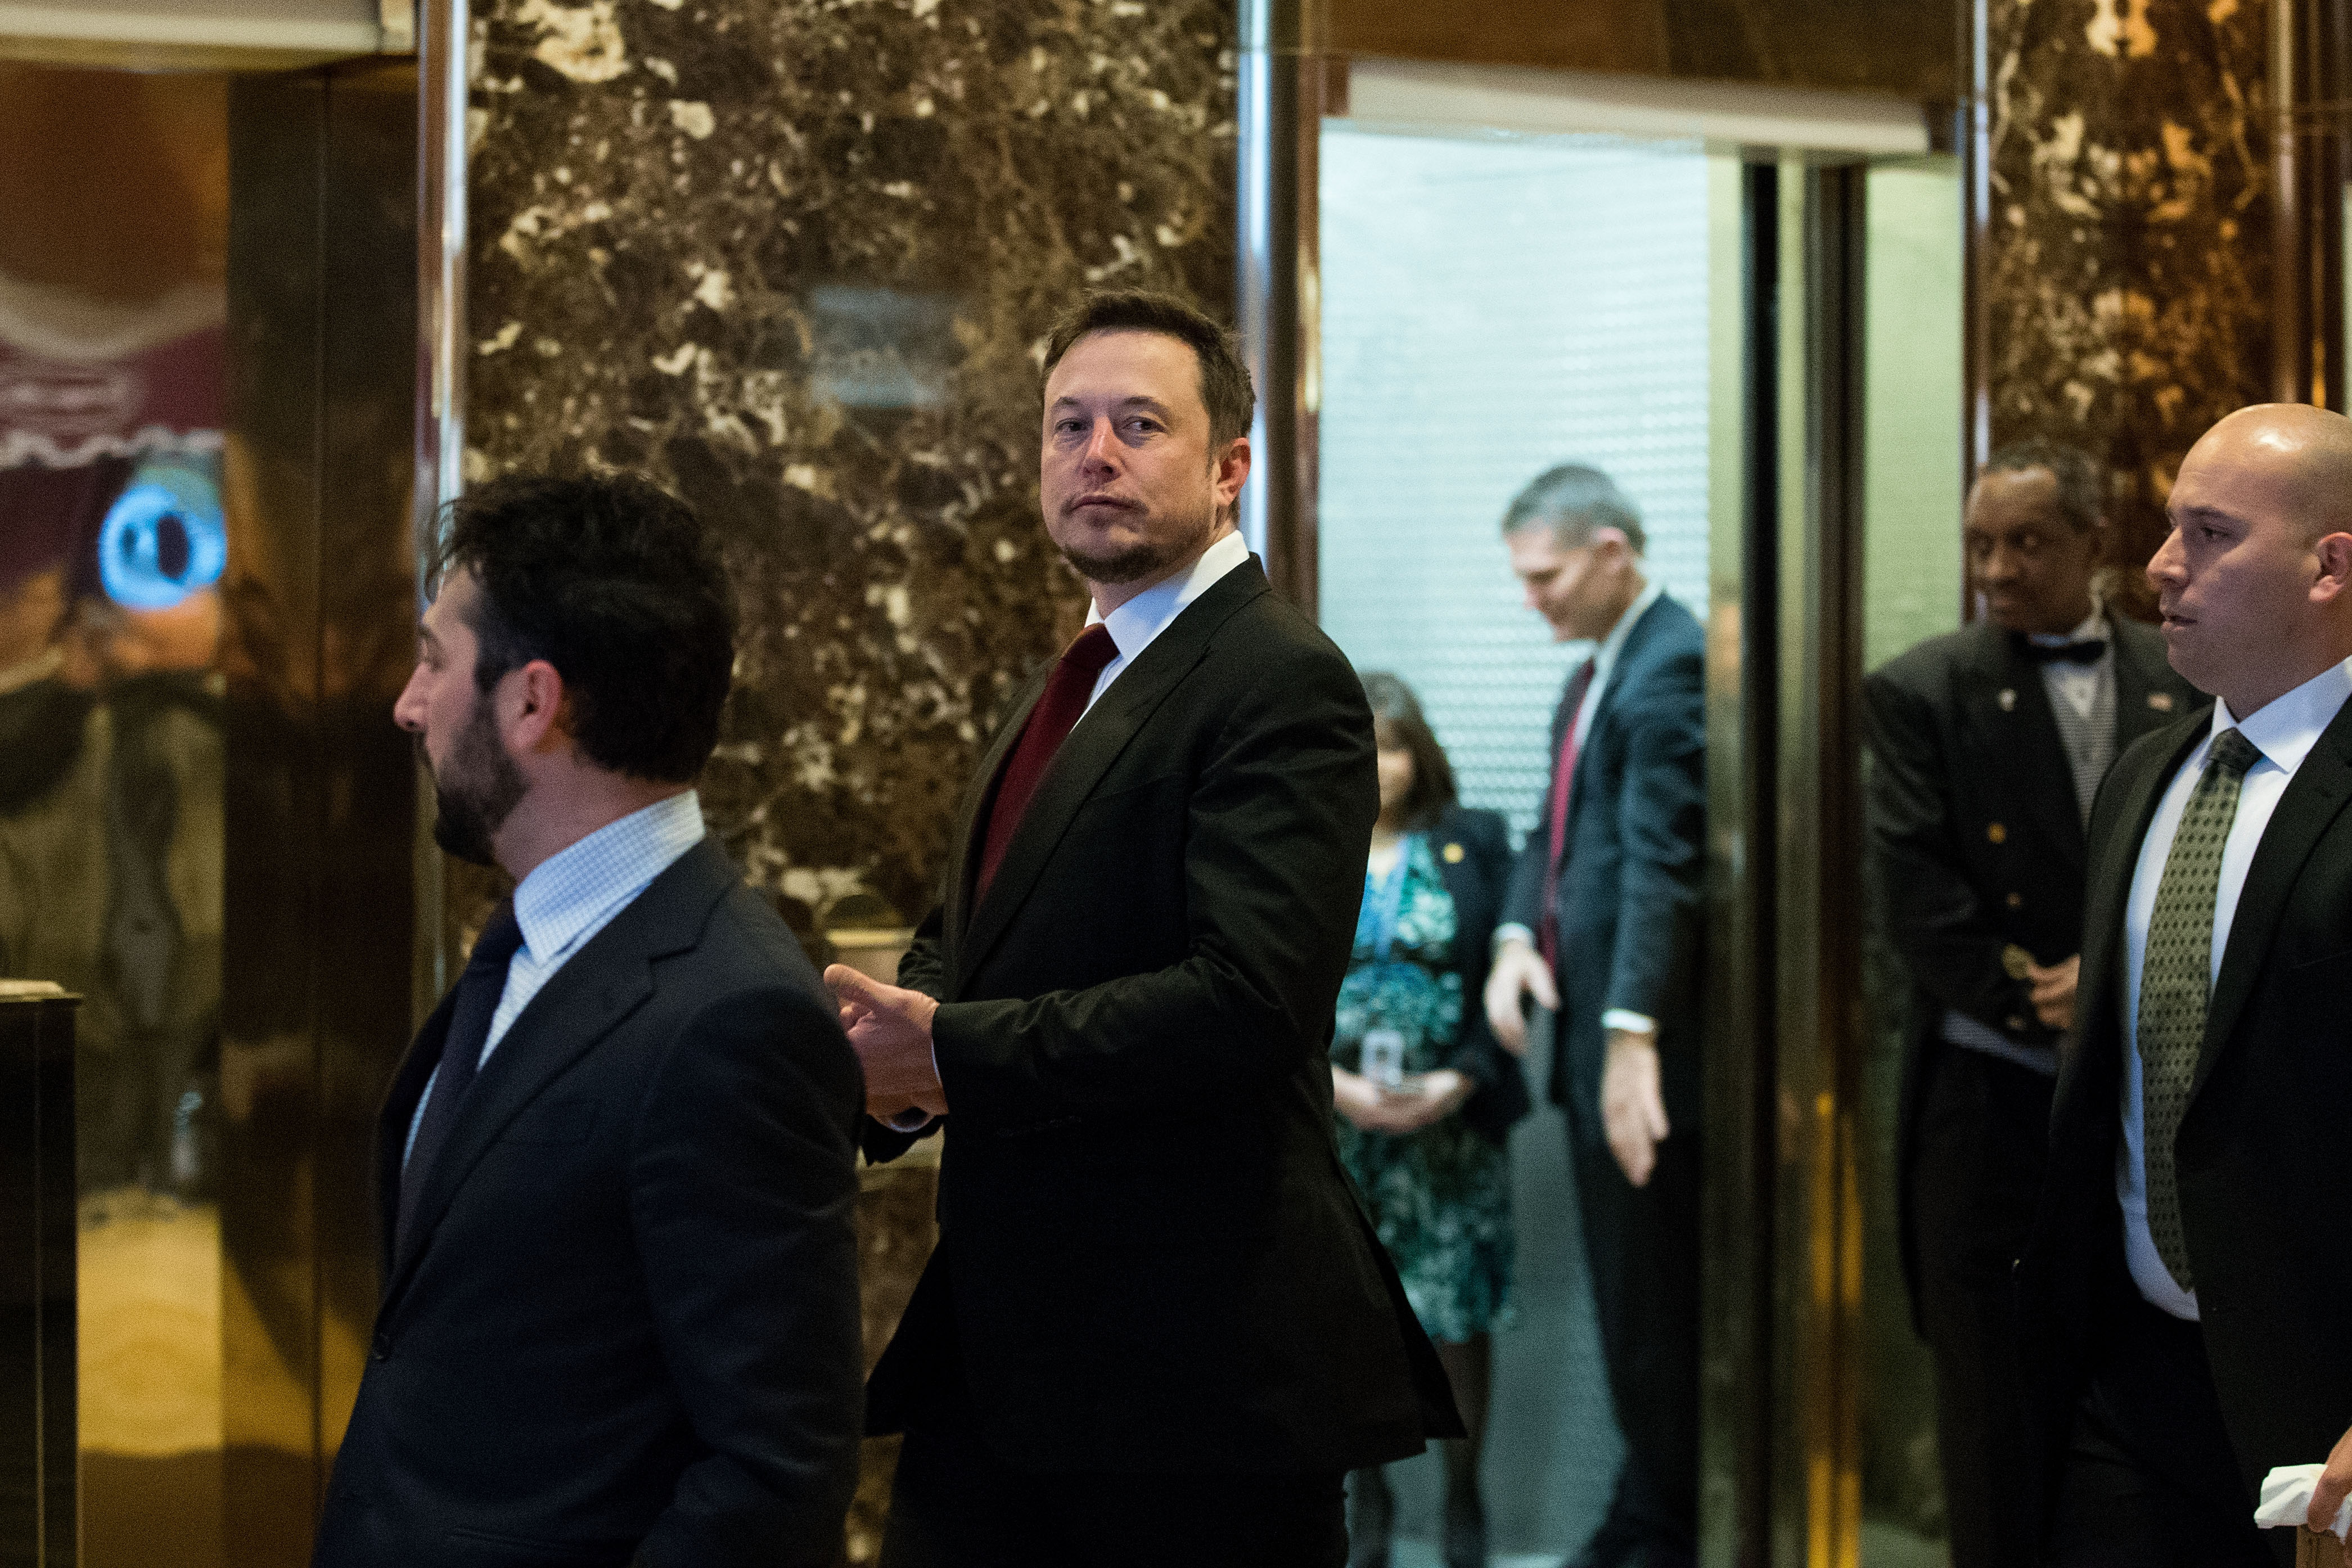 NEW YORK, NY - JANUARY 6: Entrepreneur Elon Musk arrives at Trump Tower, January 6, 2017 in New York City. President-elect Donald Trump and his transition team are in the process of filling cabinet and other high level positions for the new administration. (Photo by Drew Angerer/Getty Images) (Drew Angerer&mdash;Getty Images)